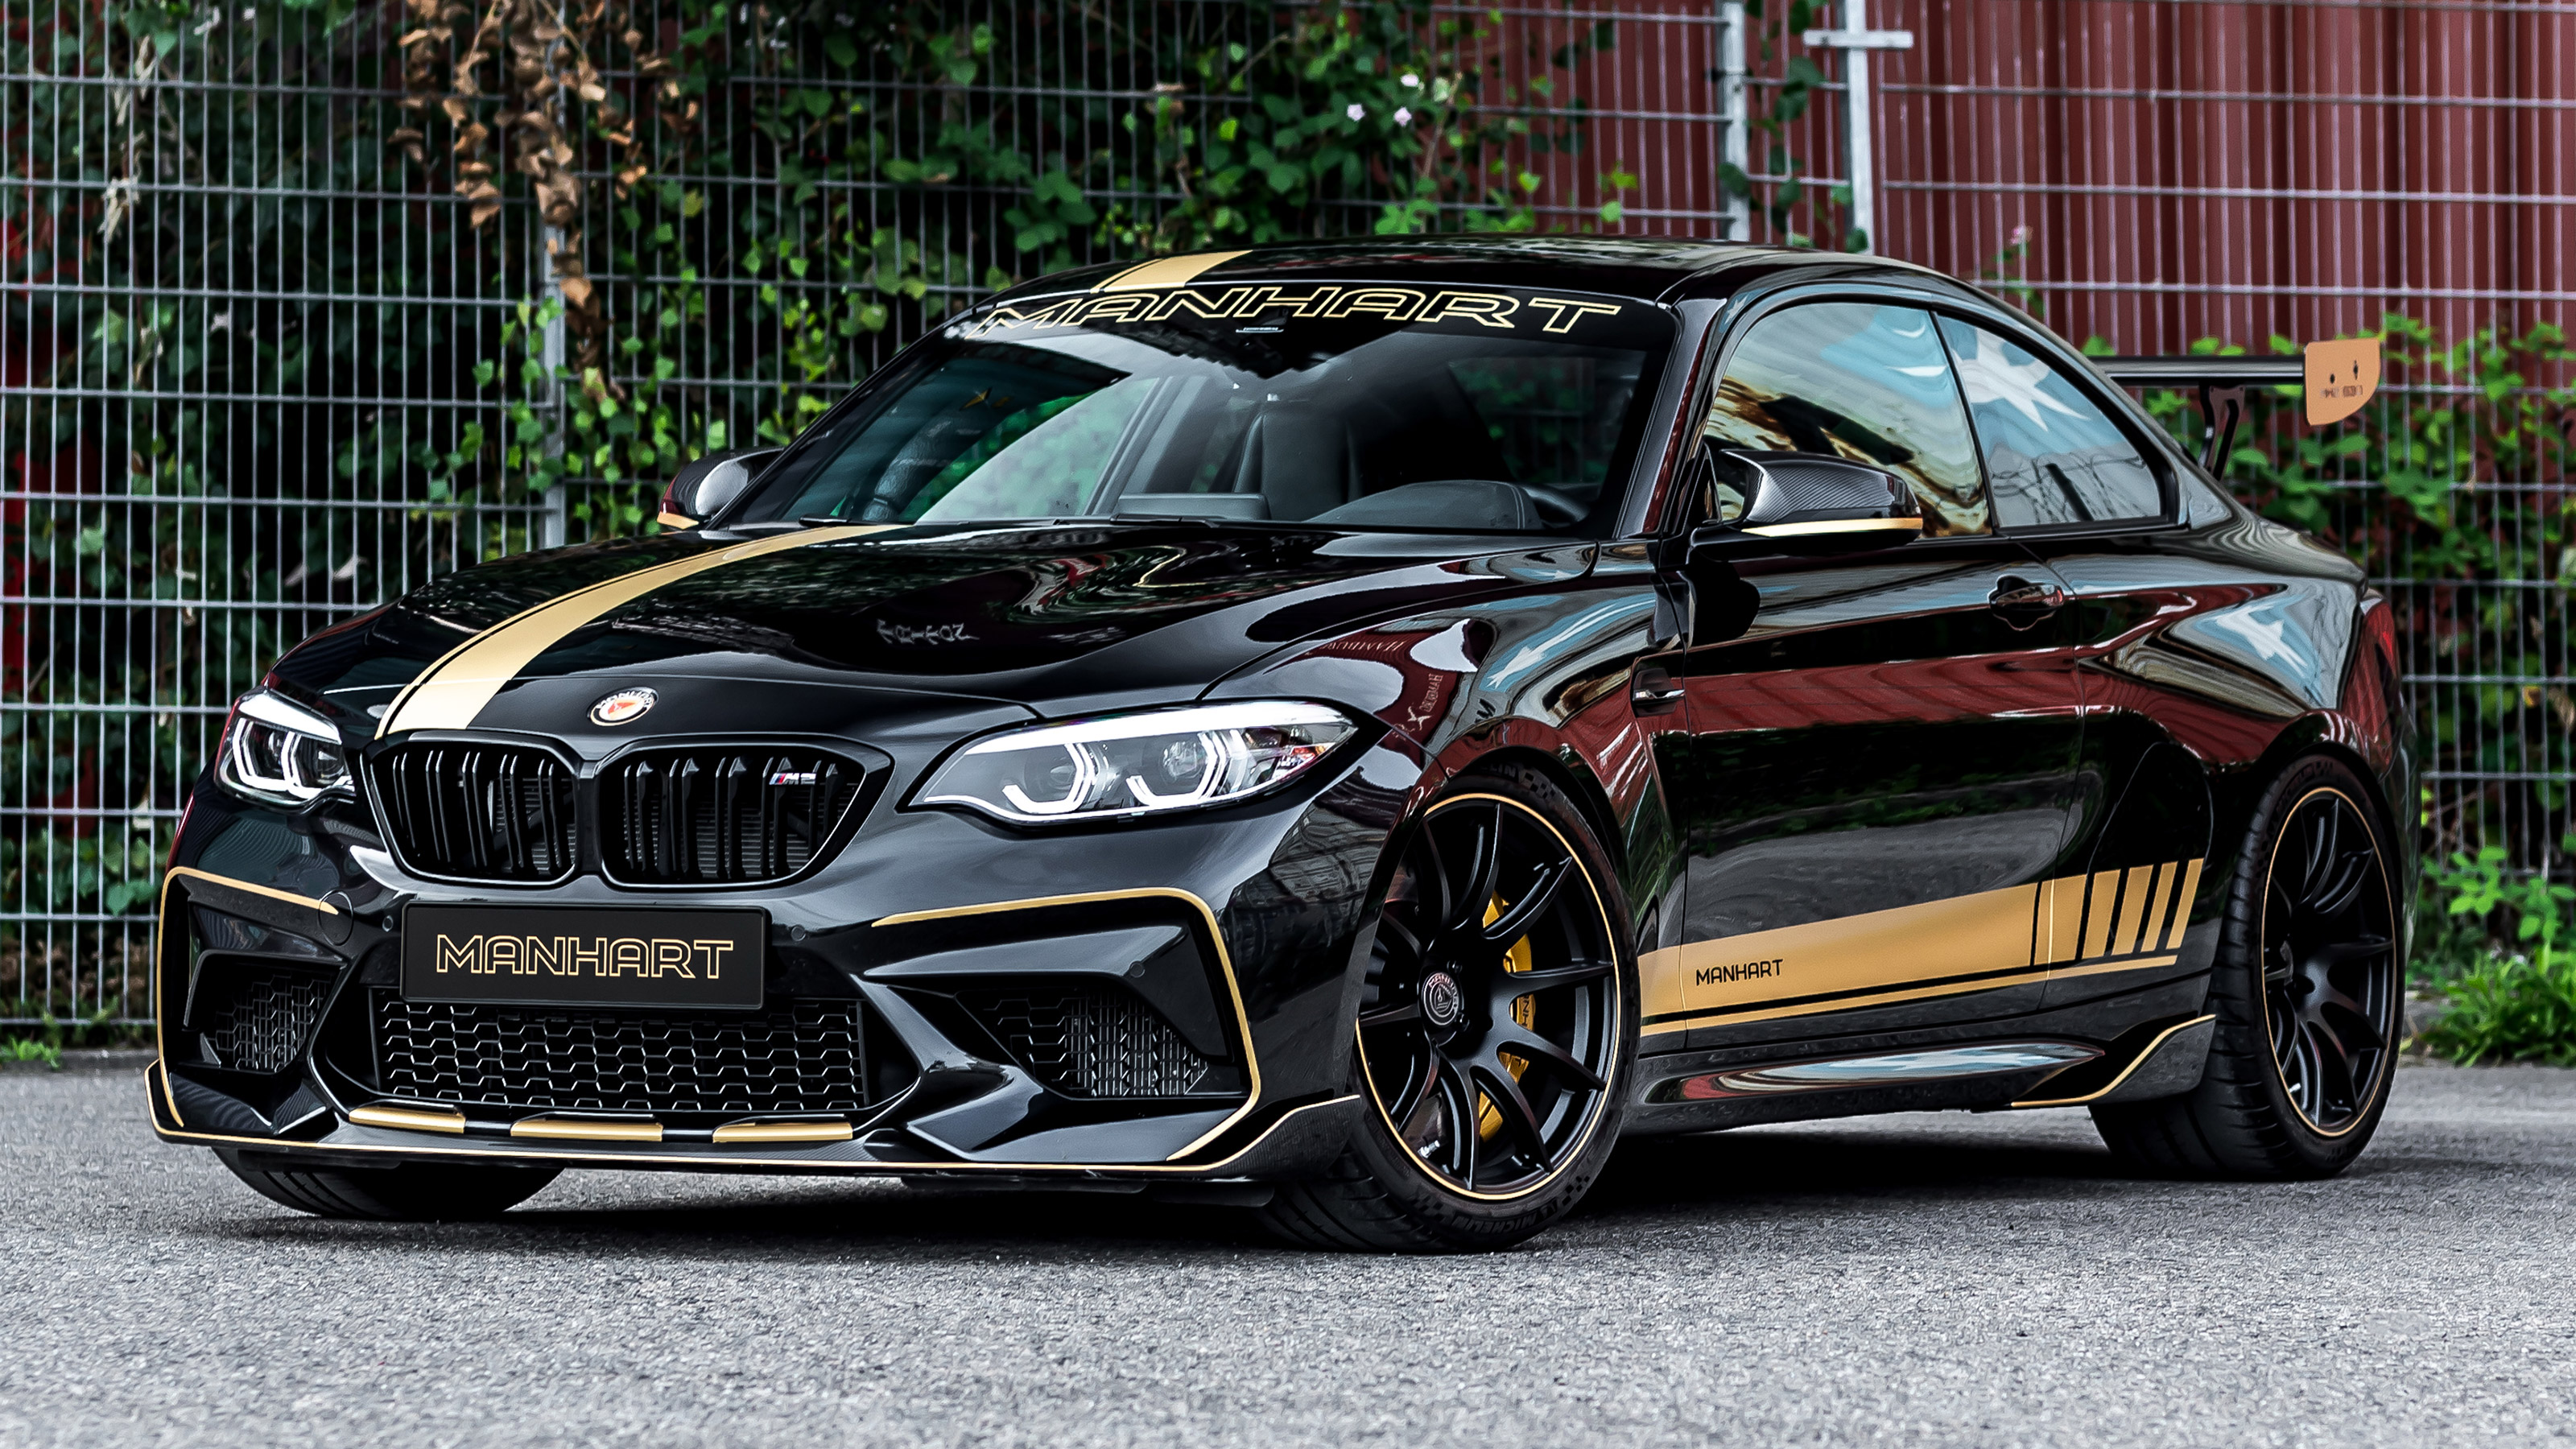 BMW M2 review - price, specs and 0-60 time